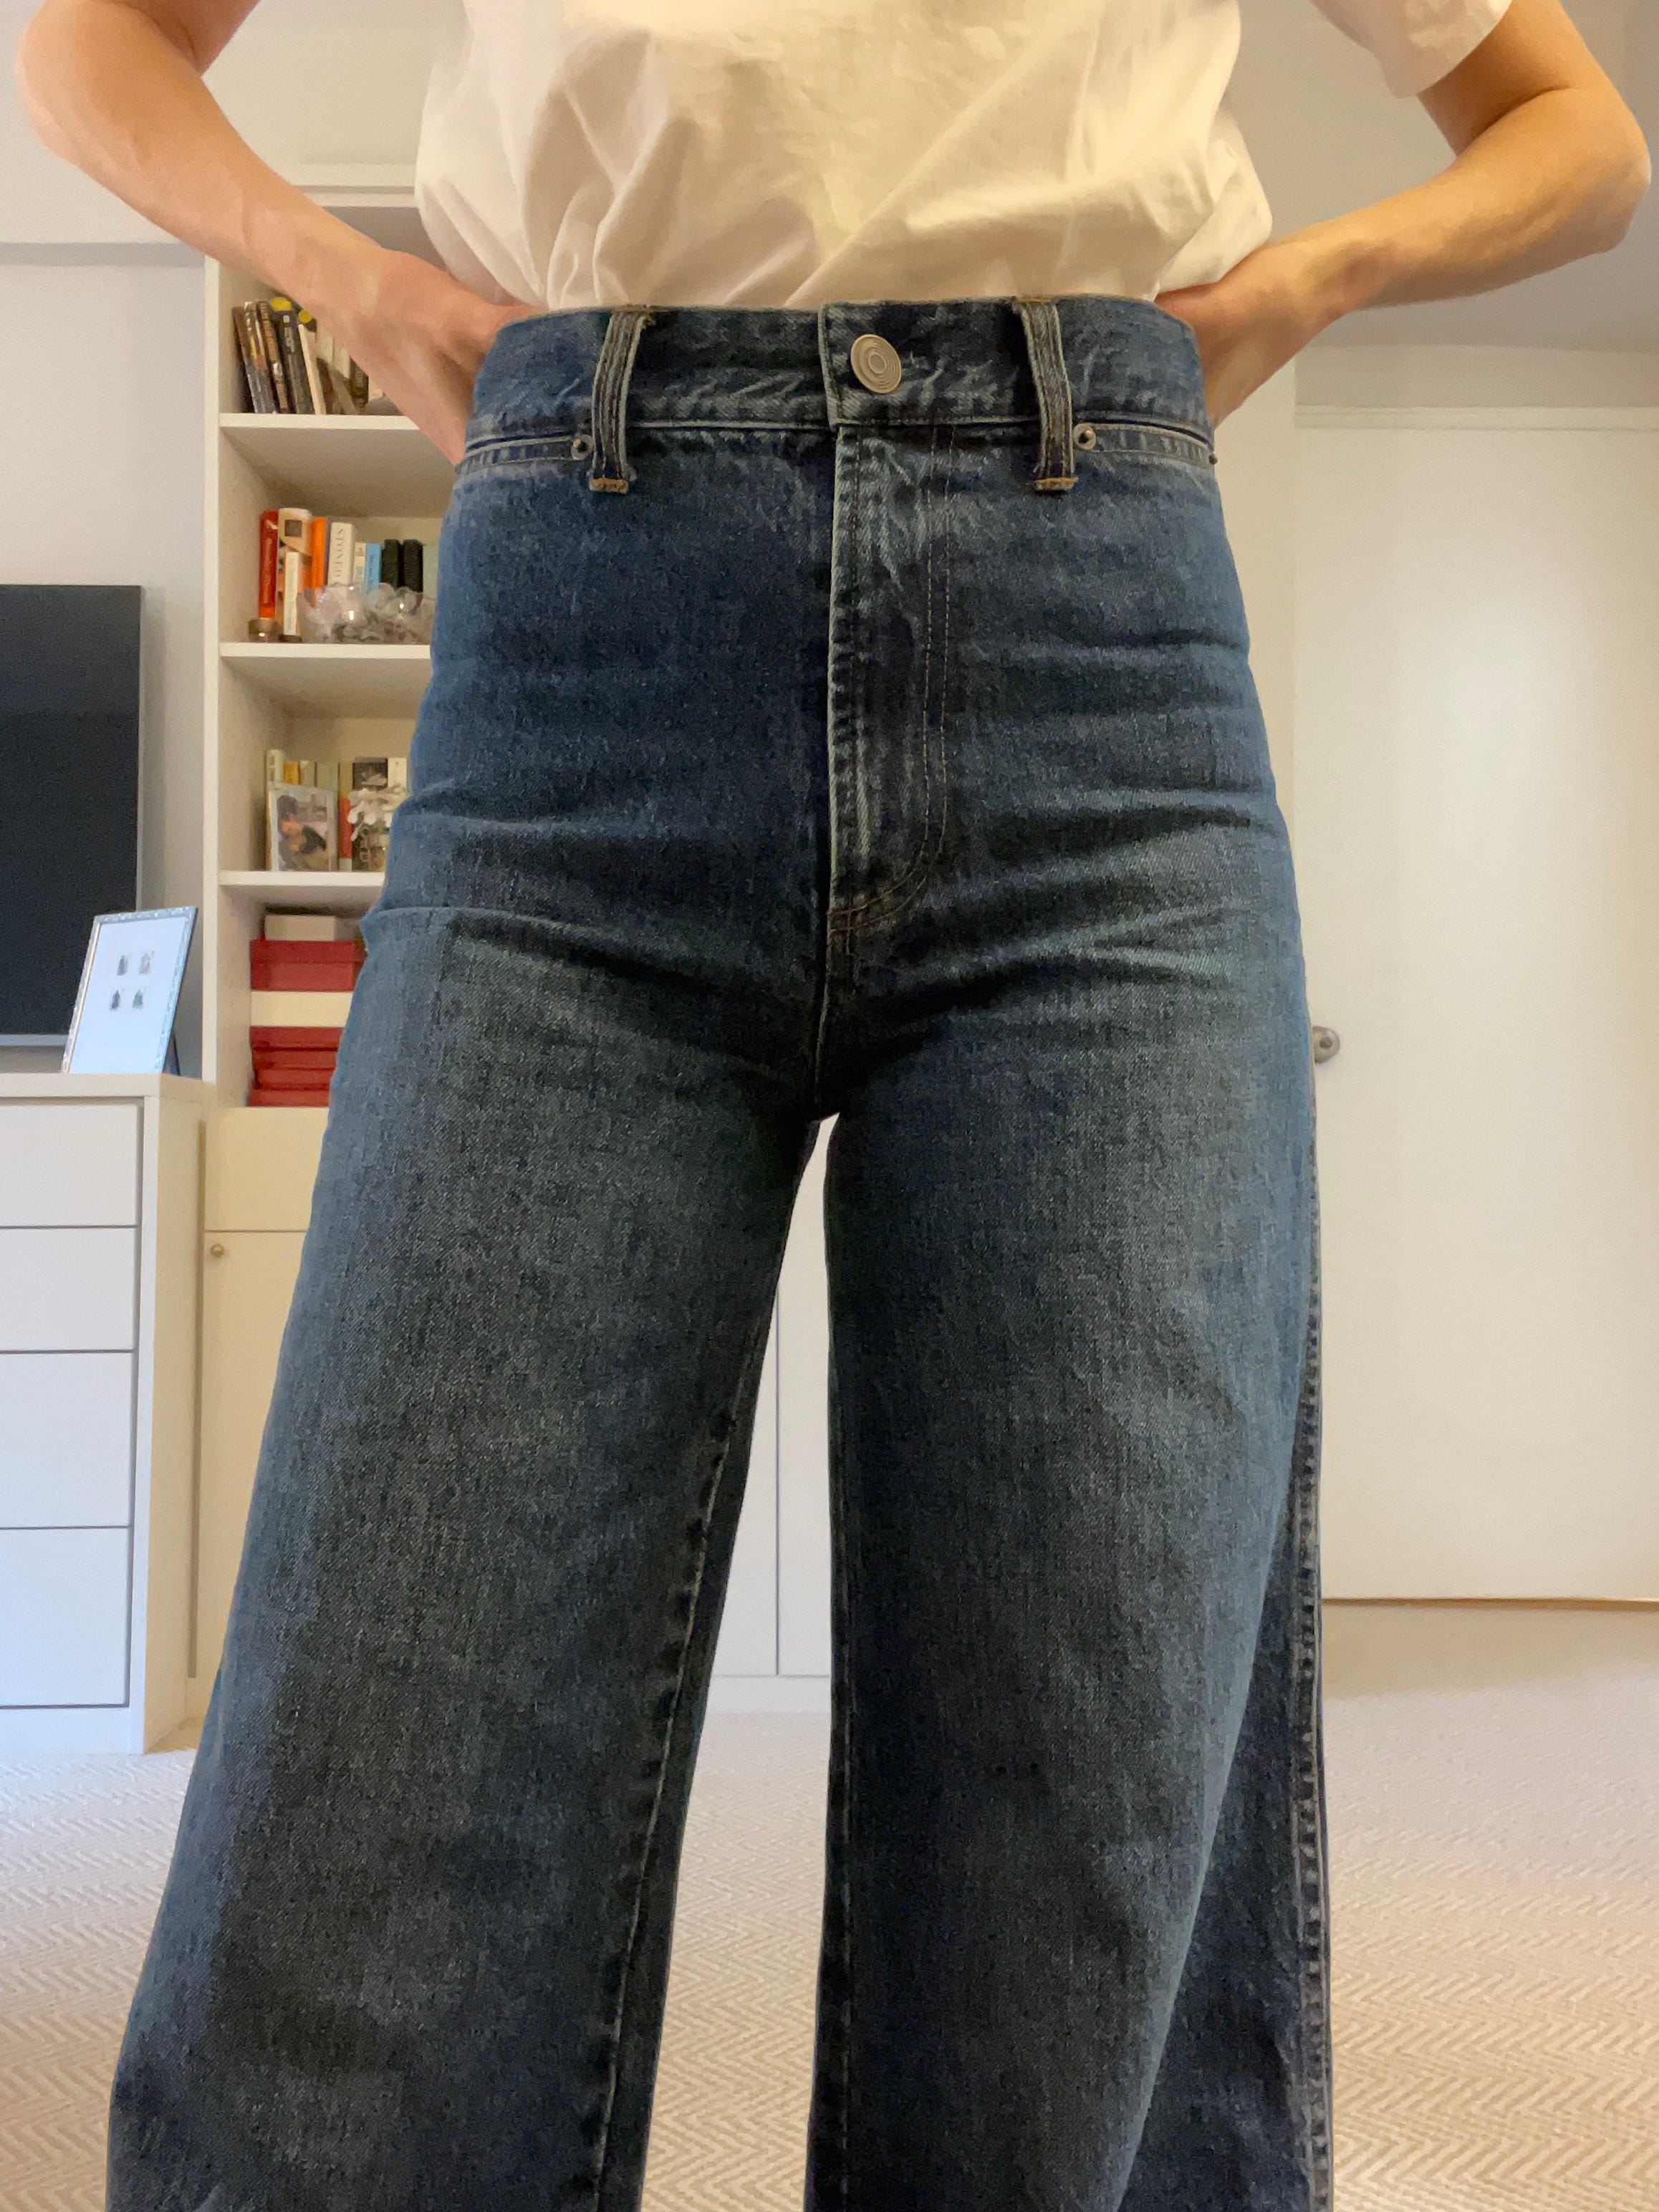 On becoming a wide leg jean person - by Becky Malinsky